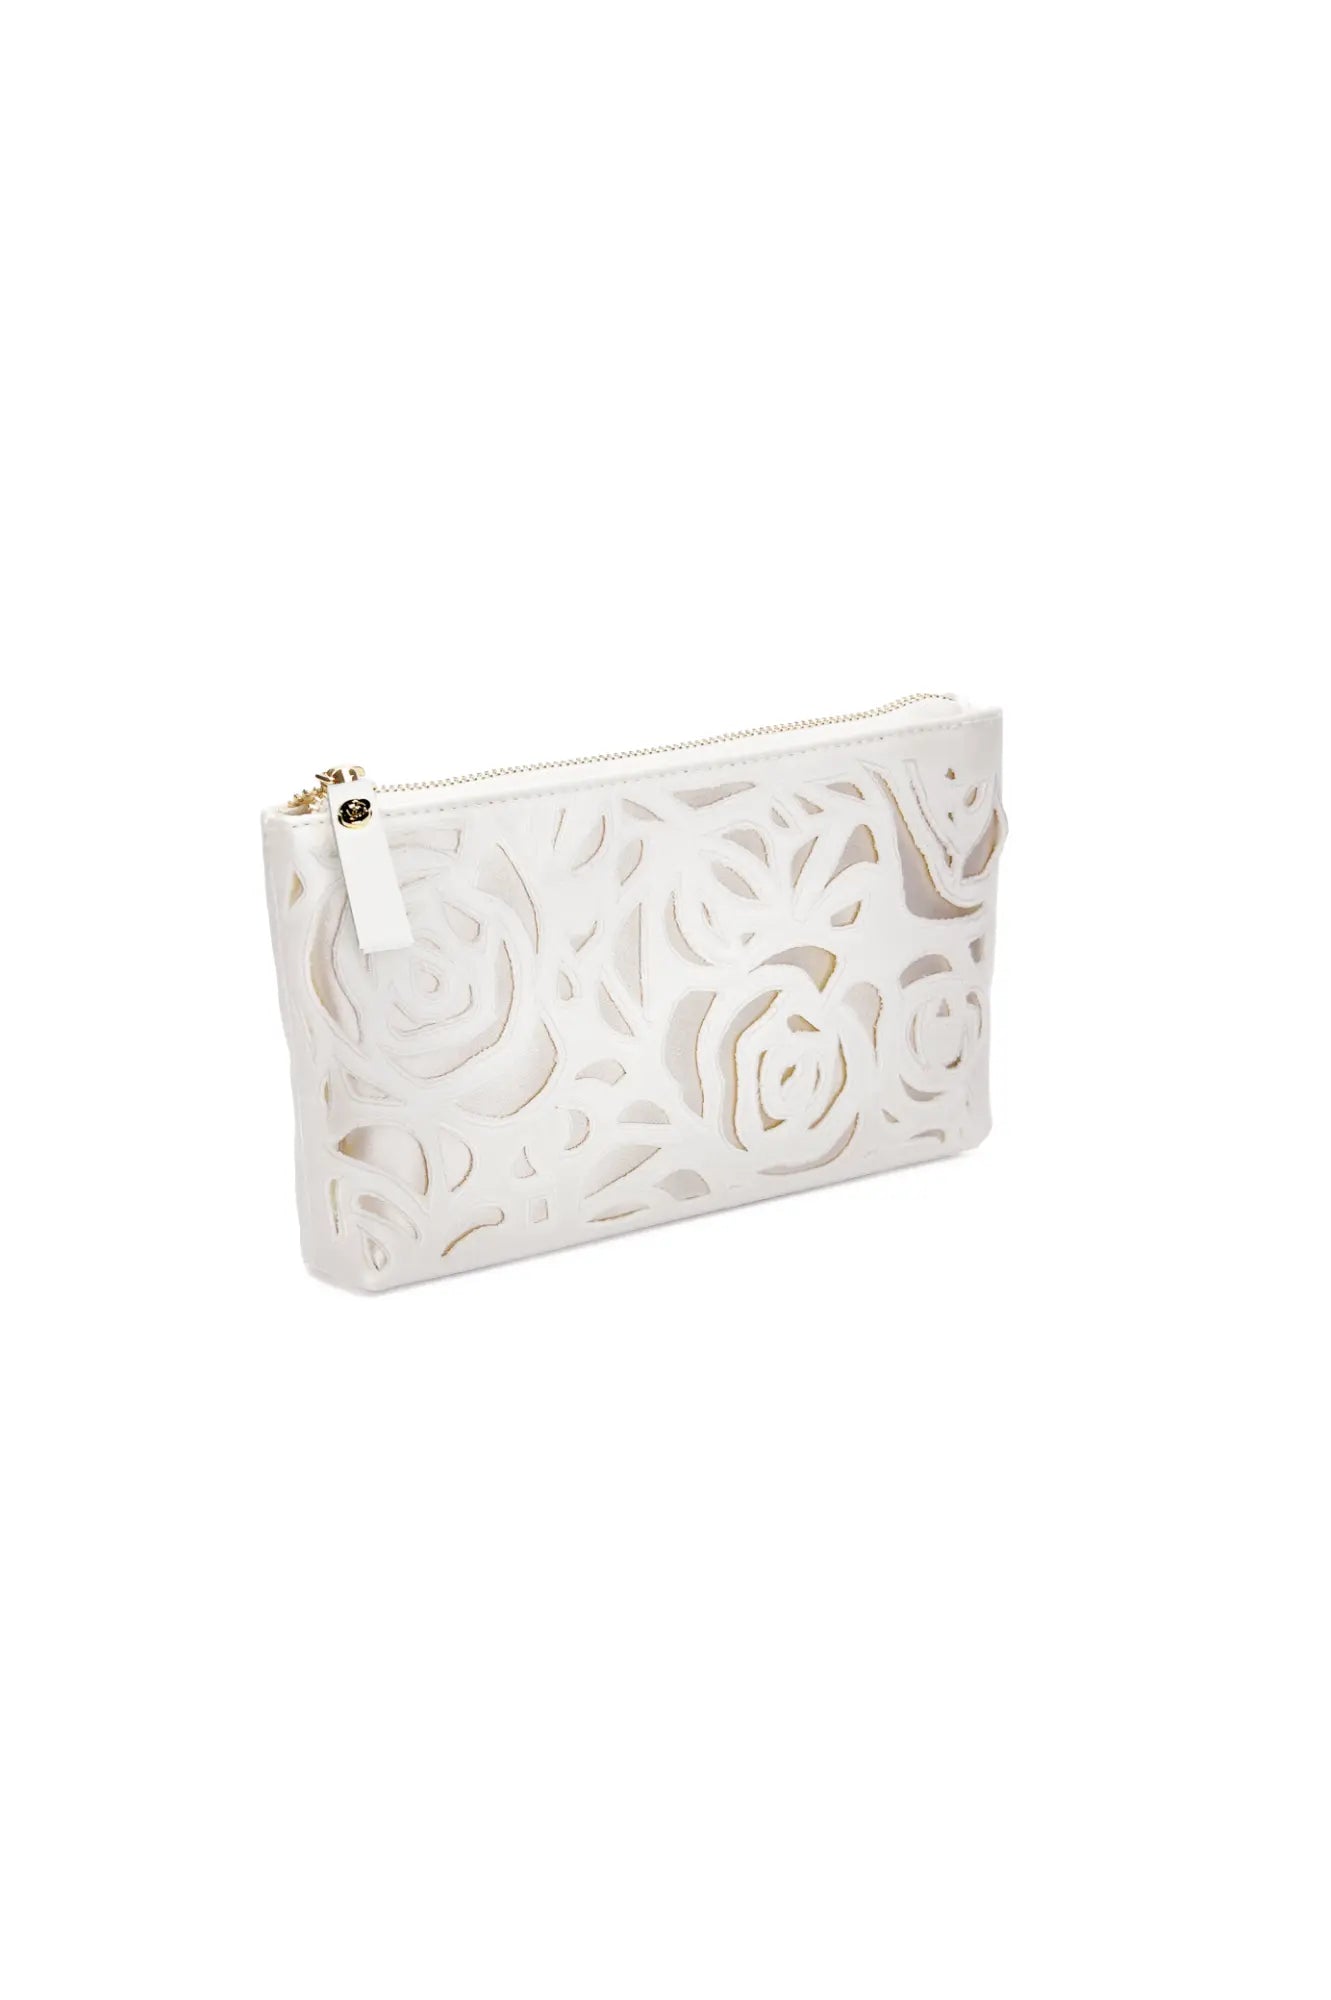 White floral cut-out design The Bella Rosa Collection Mia Acrylic Clutch with Ivory Laser Cut Rose bag on a white background.